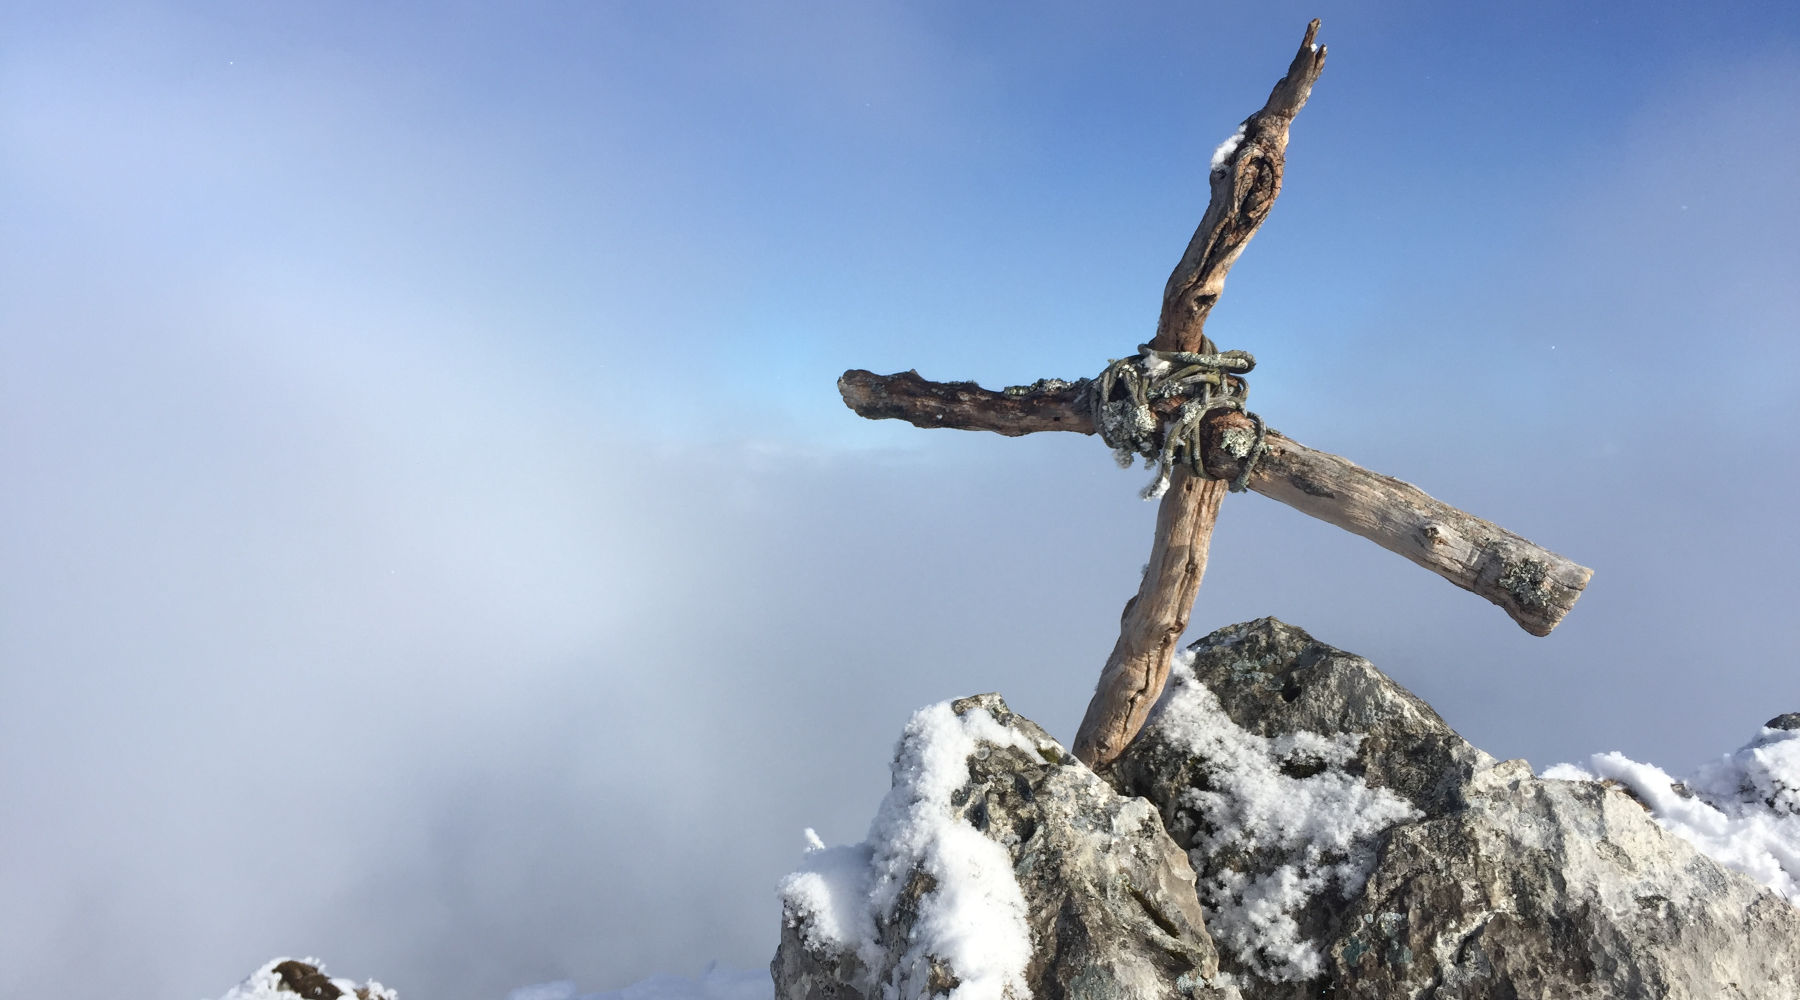 Badersee Blog: The Alps 'For Dummies': Safety In Alpine Terrain For Beginners In Winter